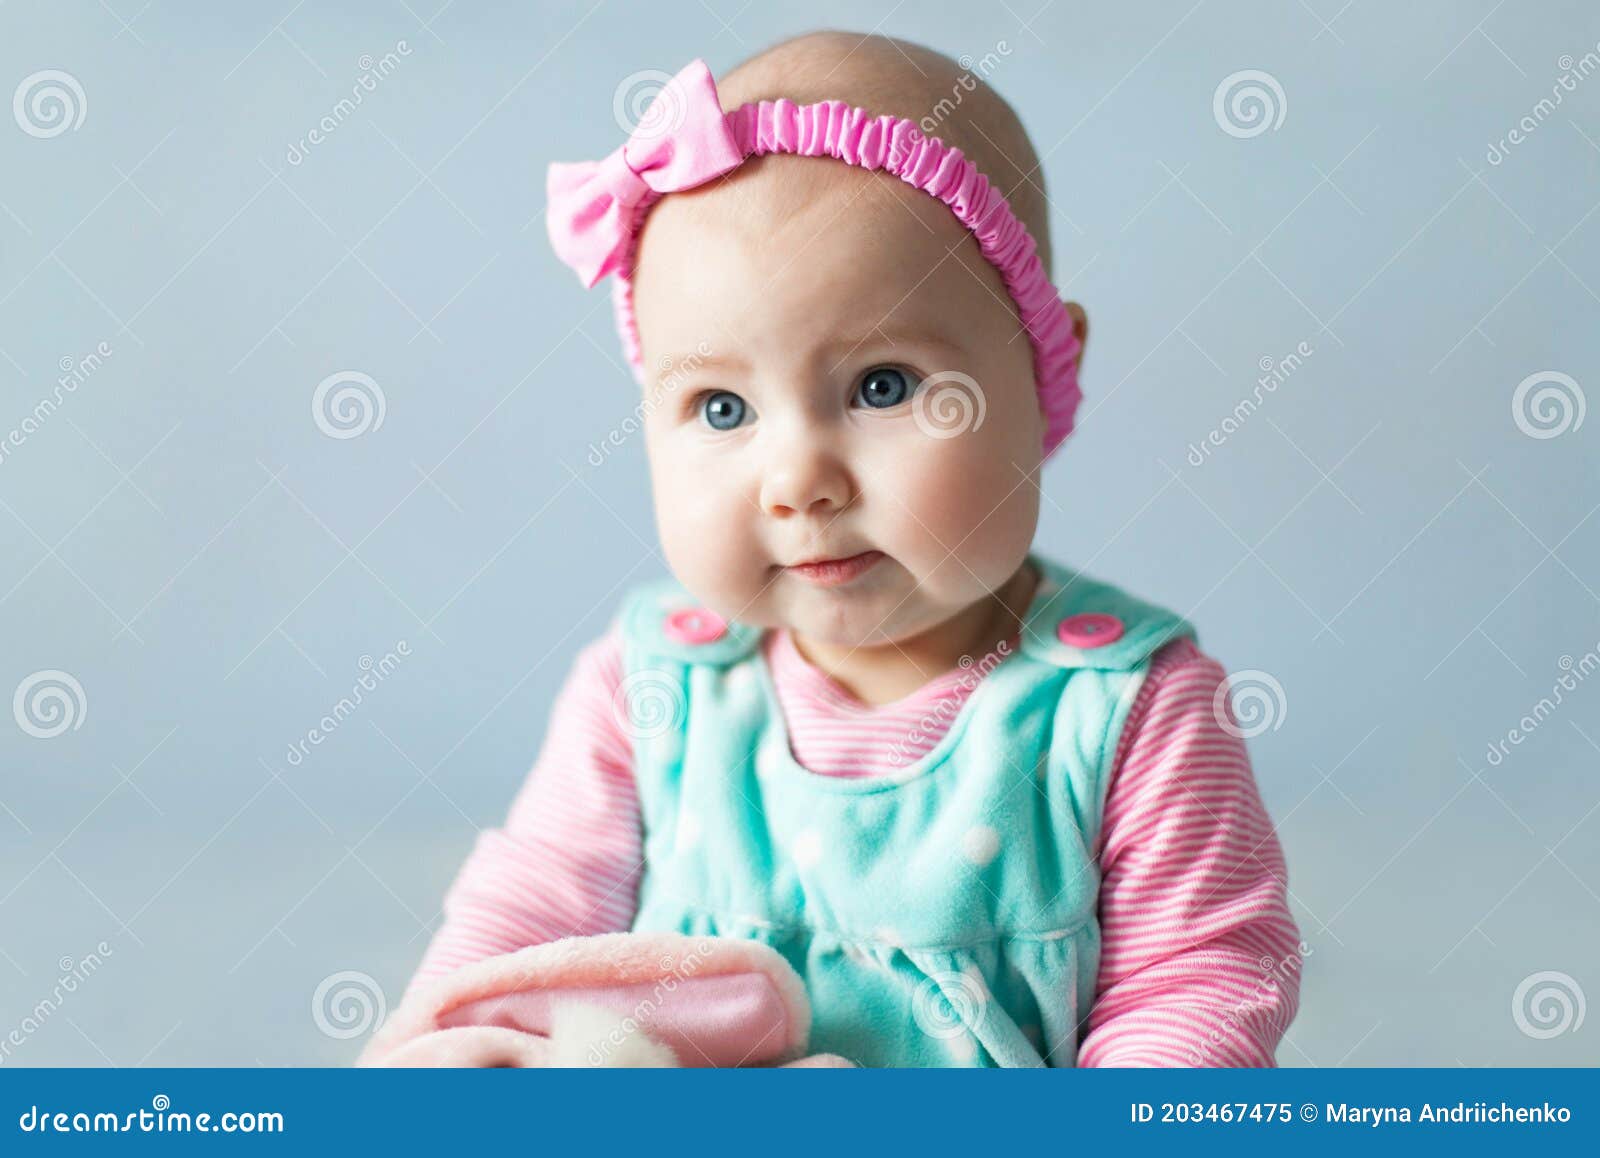 Pretty Baby Girl with Sweet Cute Pink Cheeks. Child Has Blue Eyes ...